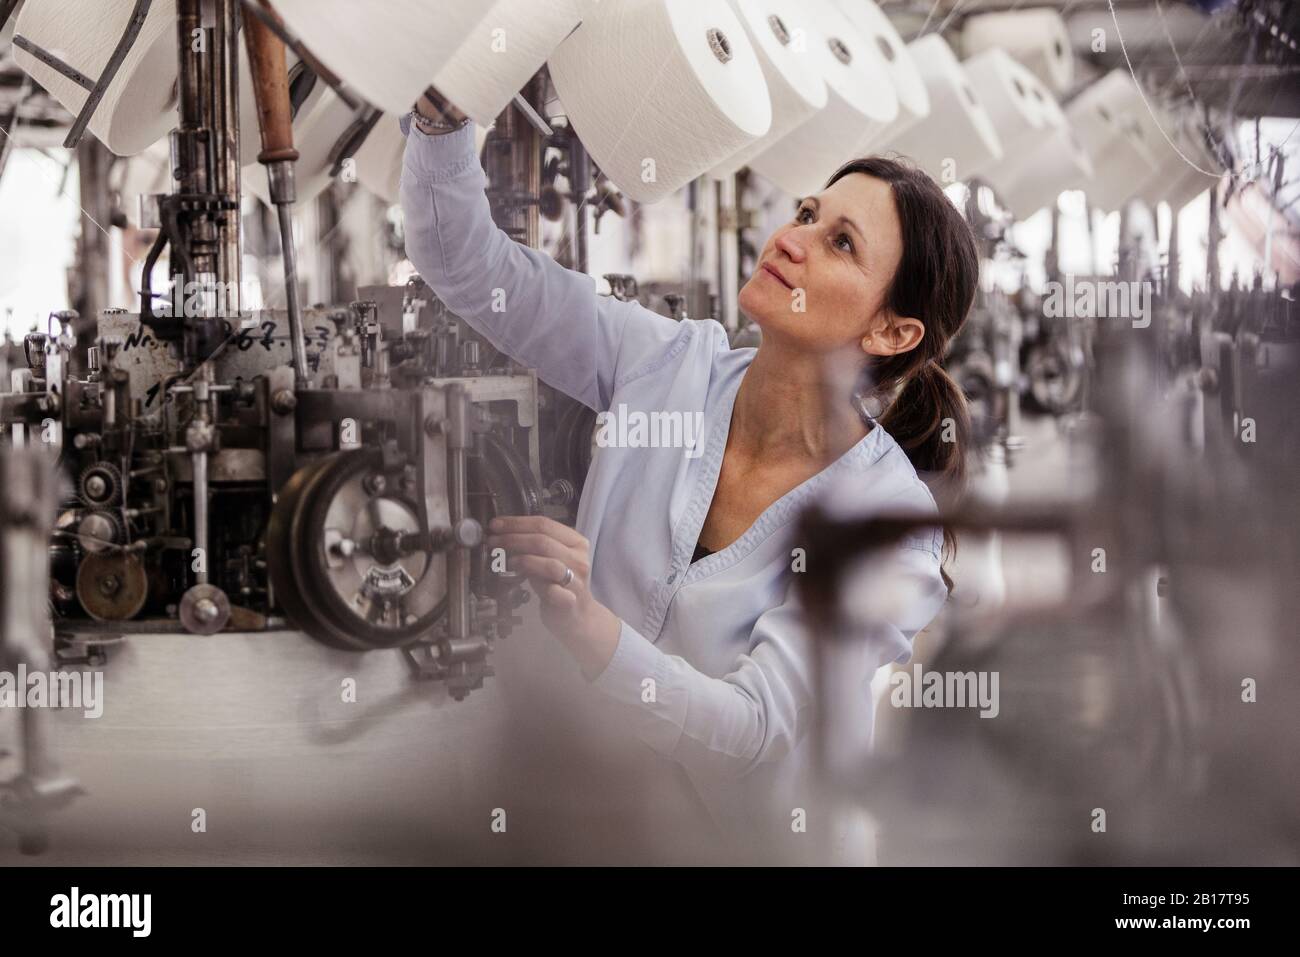 Woman checking cotton reel in a textile factory Stock Photo